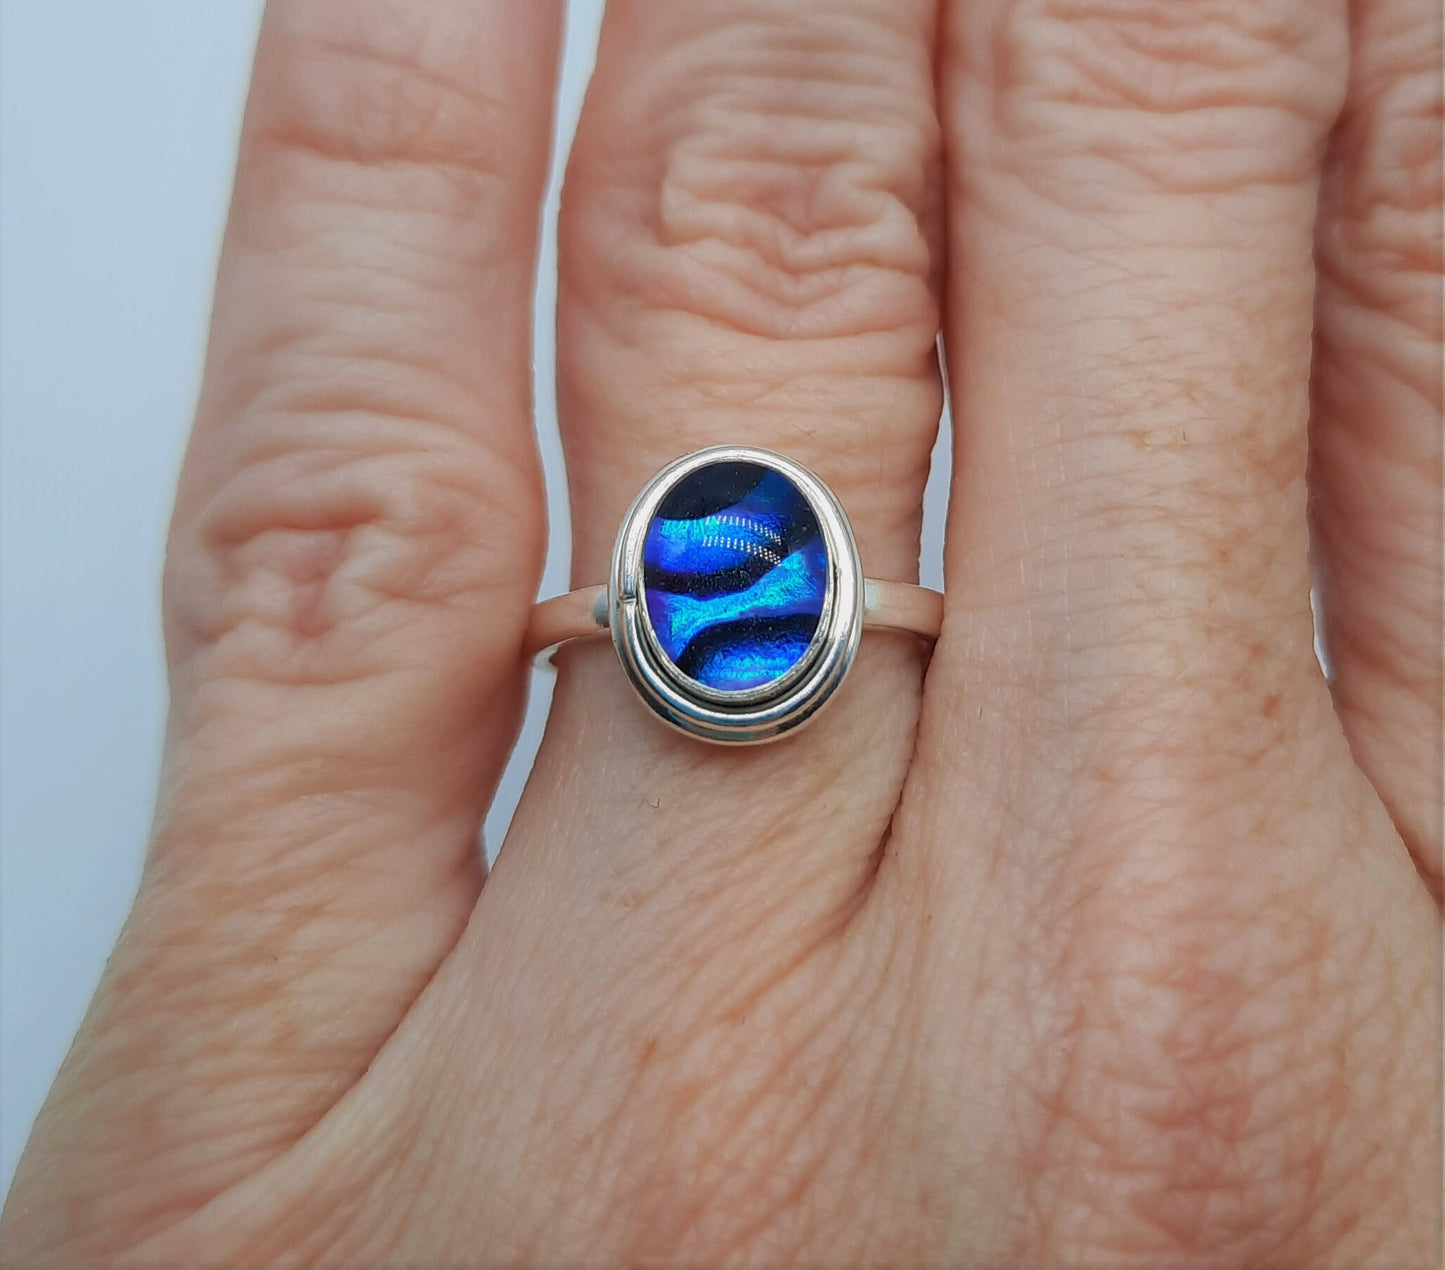 Handmade / Handcrafted 925 Sterling Silver Purple Blue Abalone / Paua Seashell Ring, Oval, Sealed with Holographic Mica Infused Resin